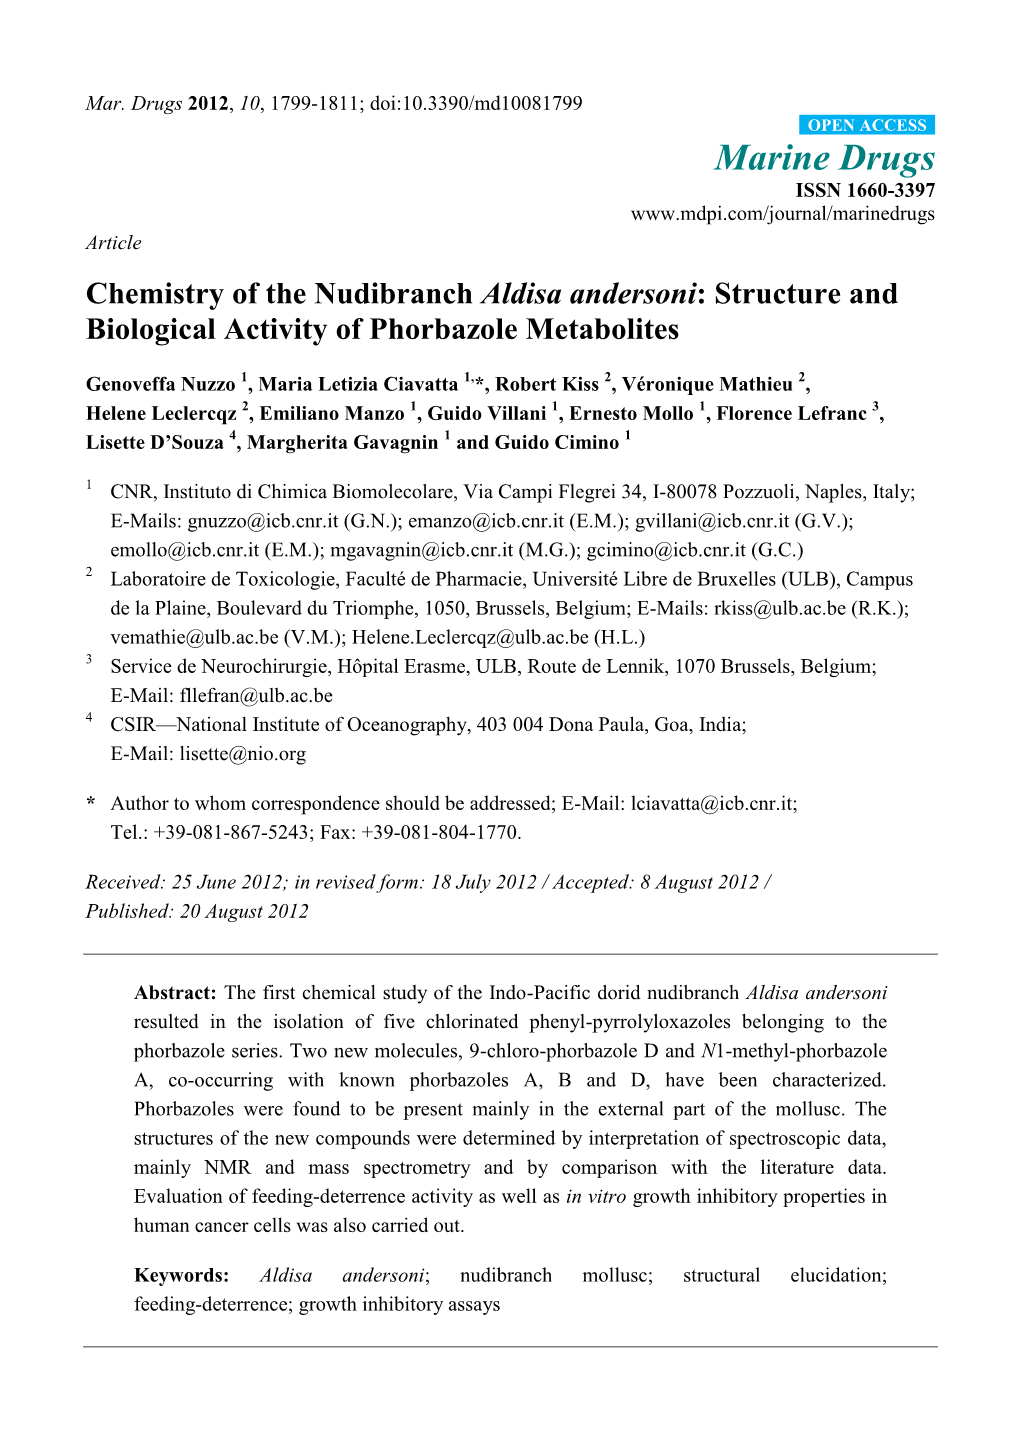 Chemistry of the Nudibranch Aldisa Andersoni: Structure and Biological Activity of Phorbazole Metabolites